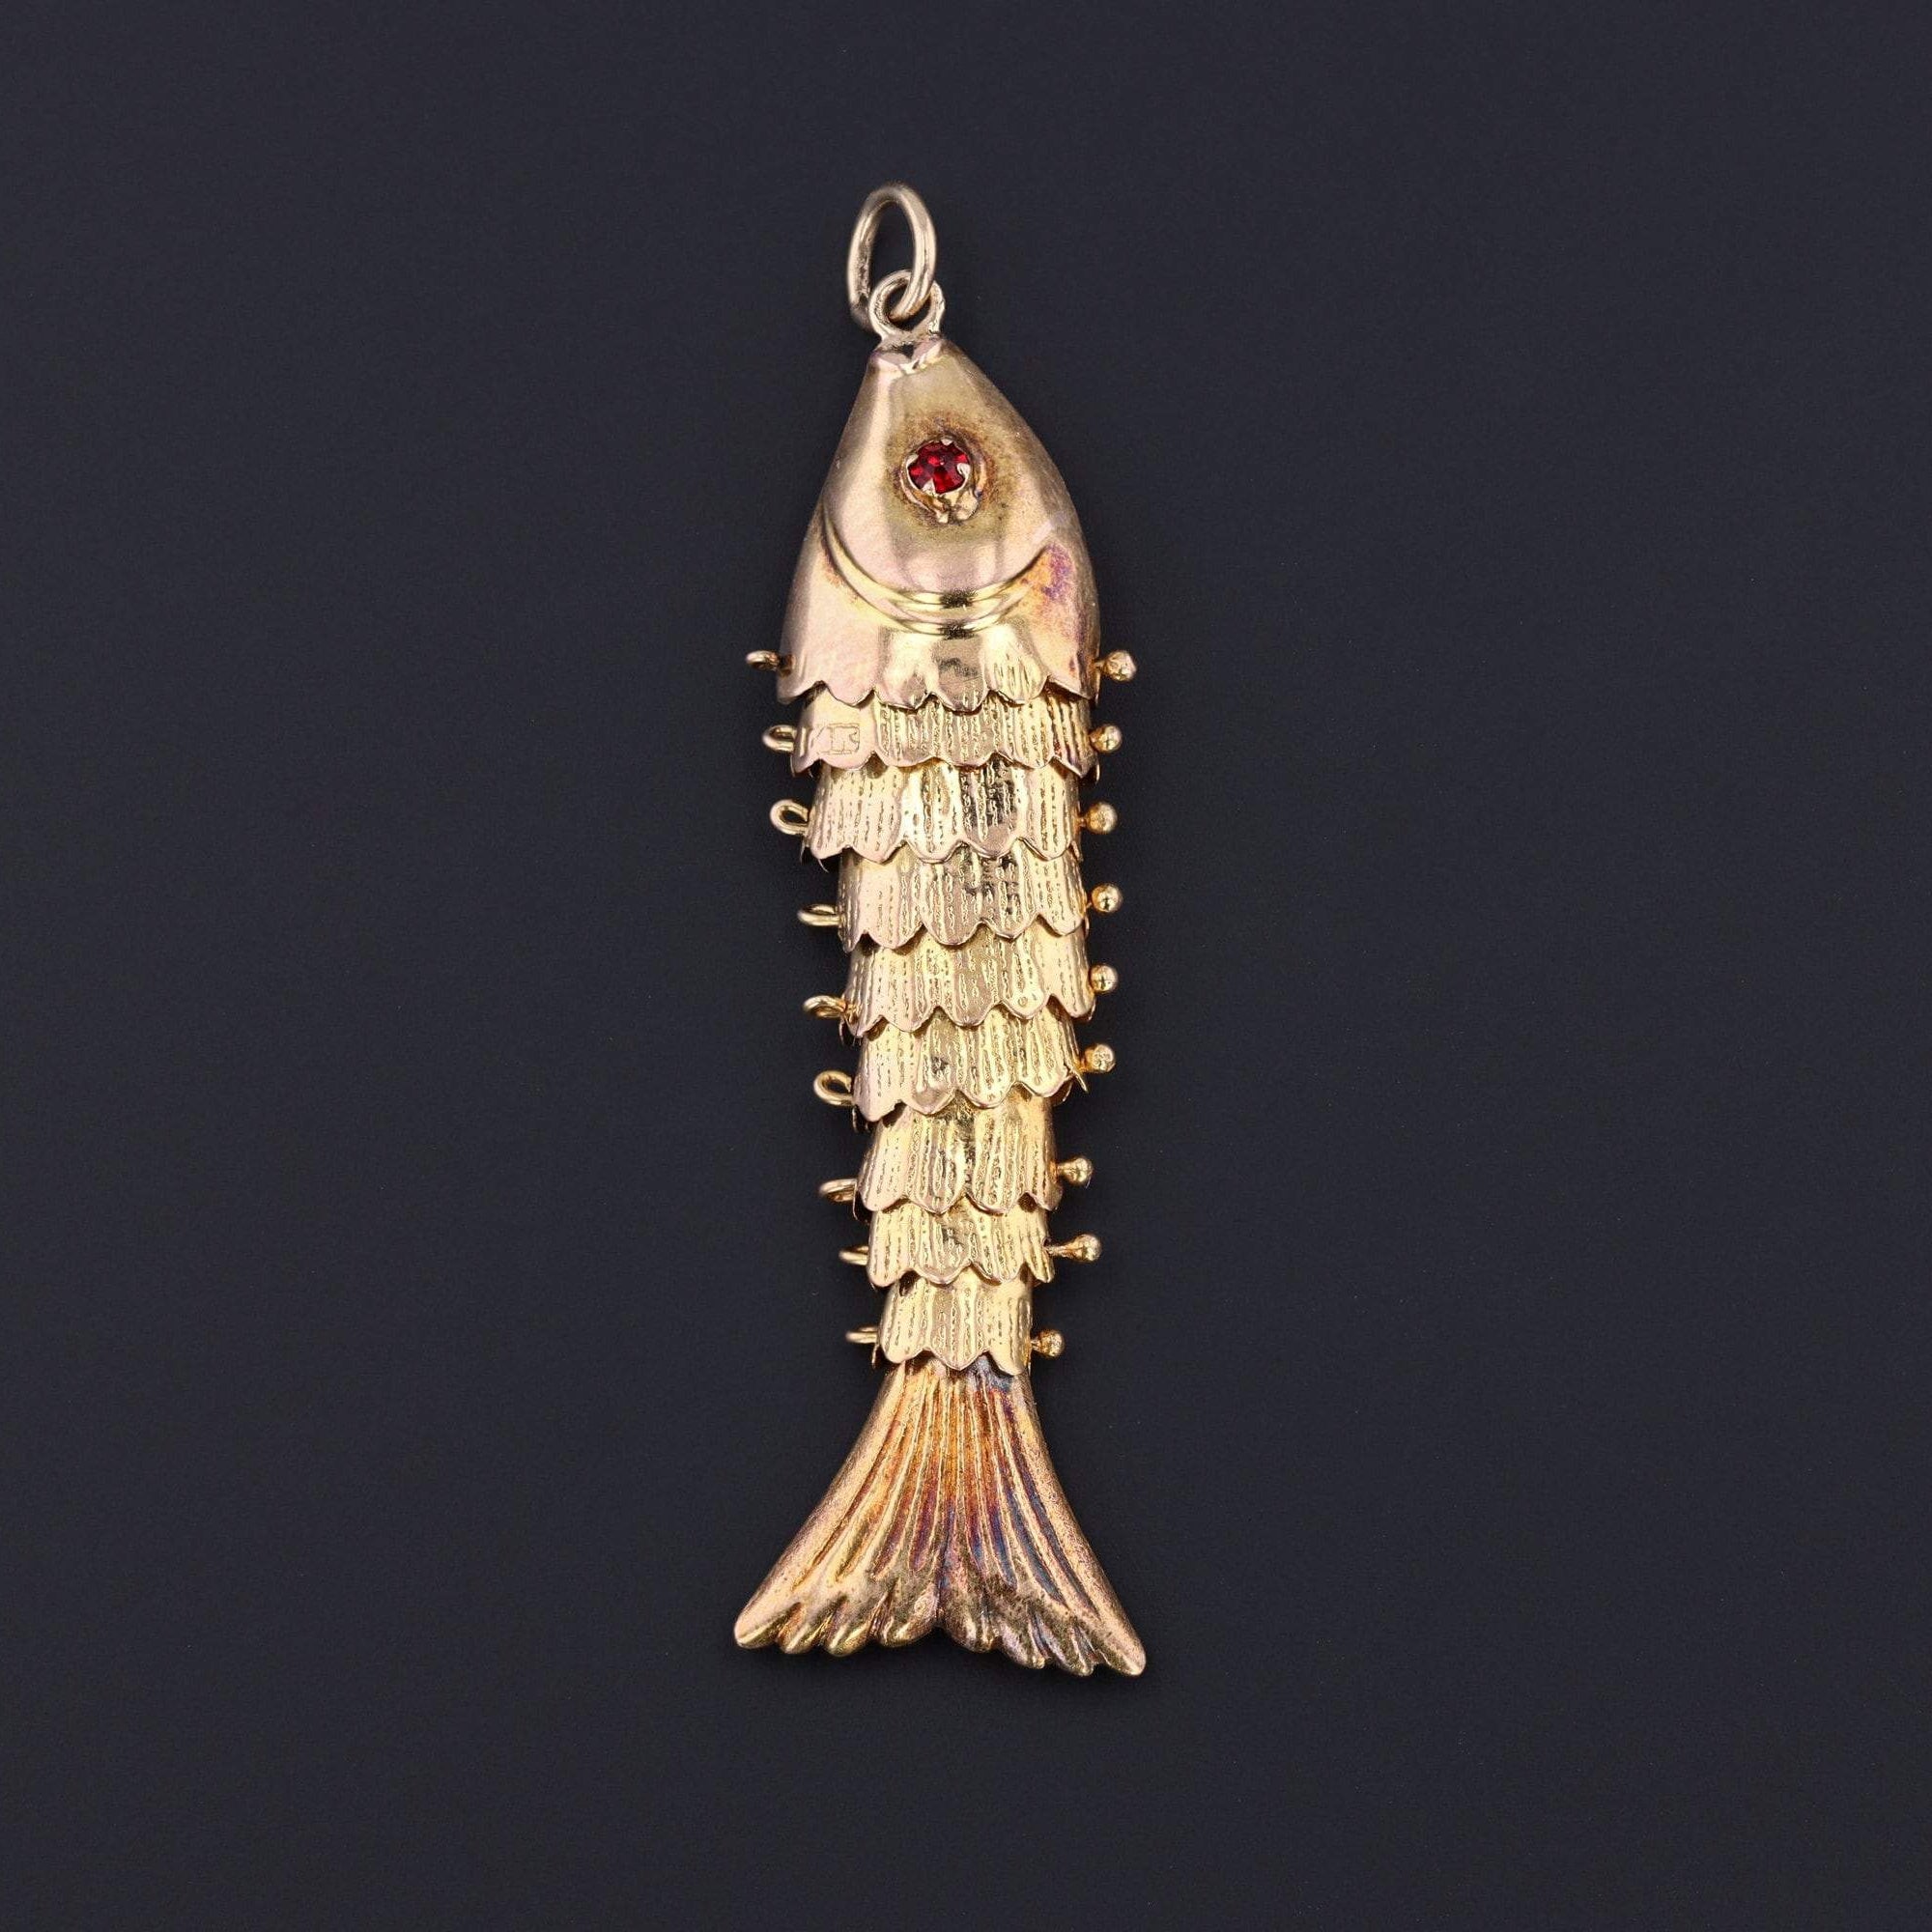 Moveable Fish Charm or Pendant | 14k Gold Fish Charm 